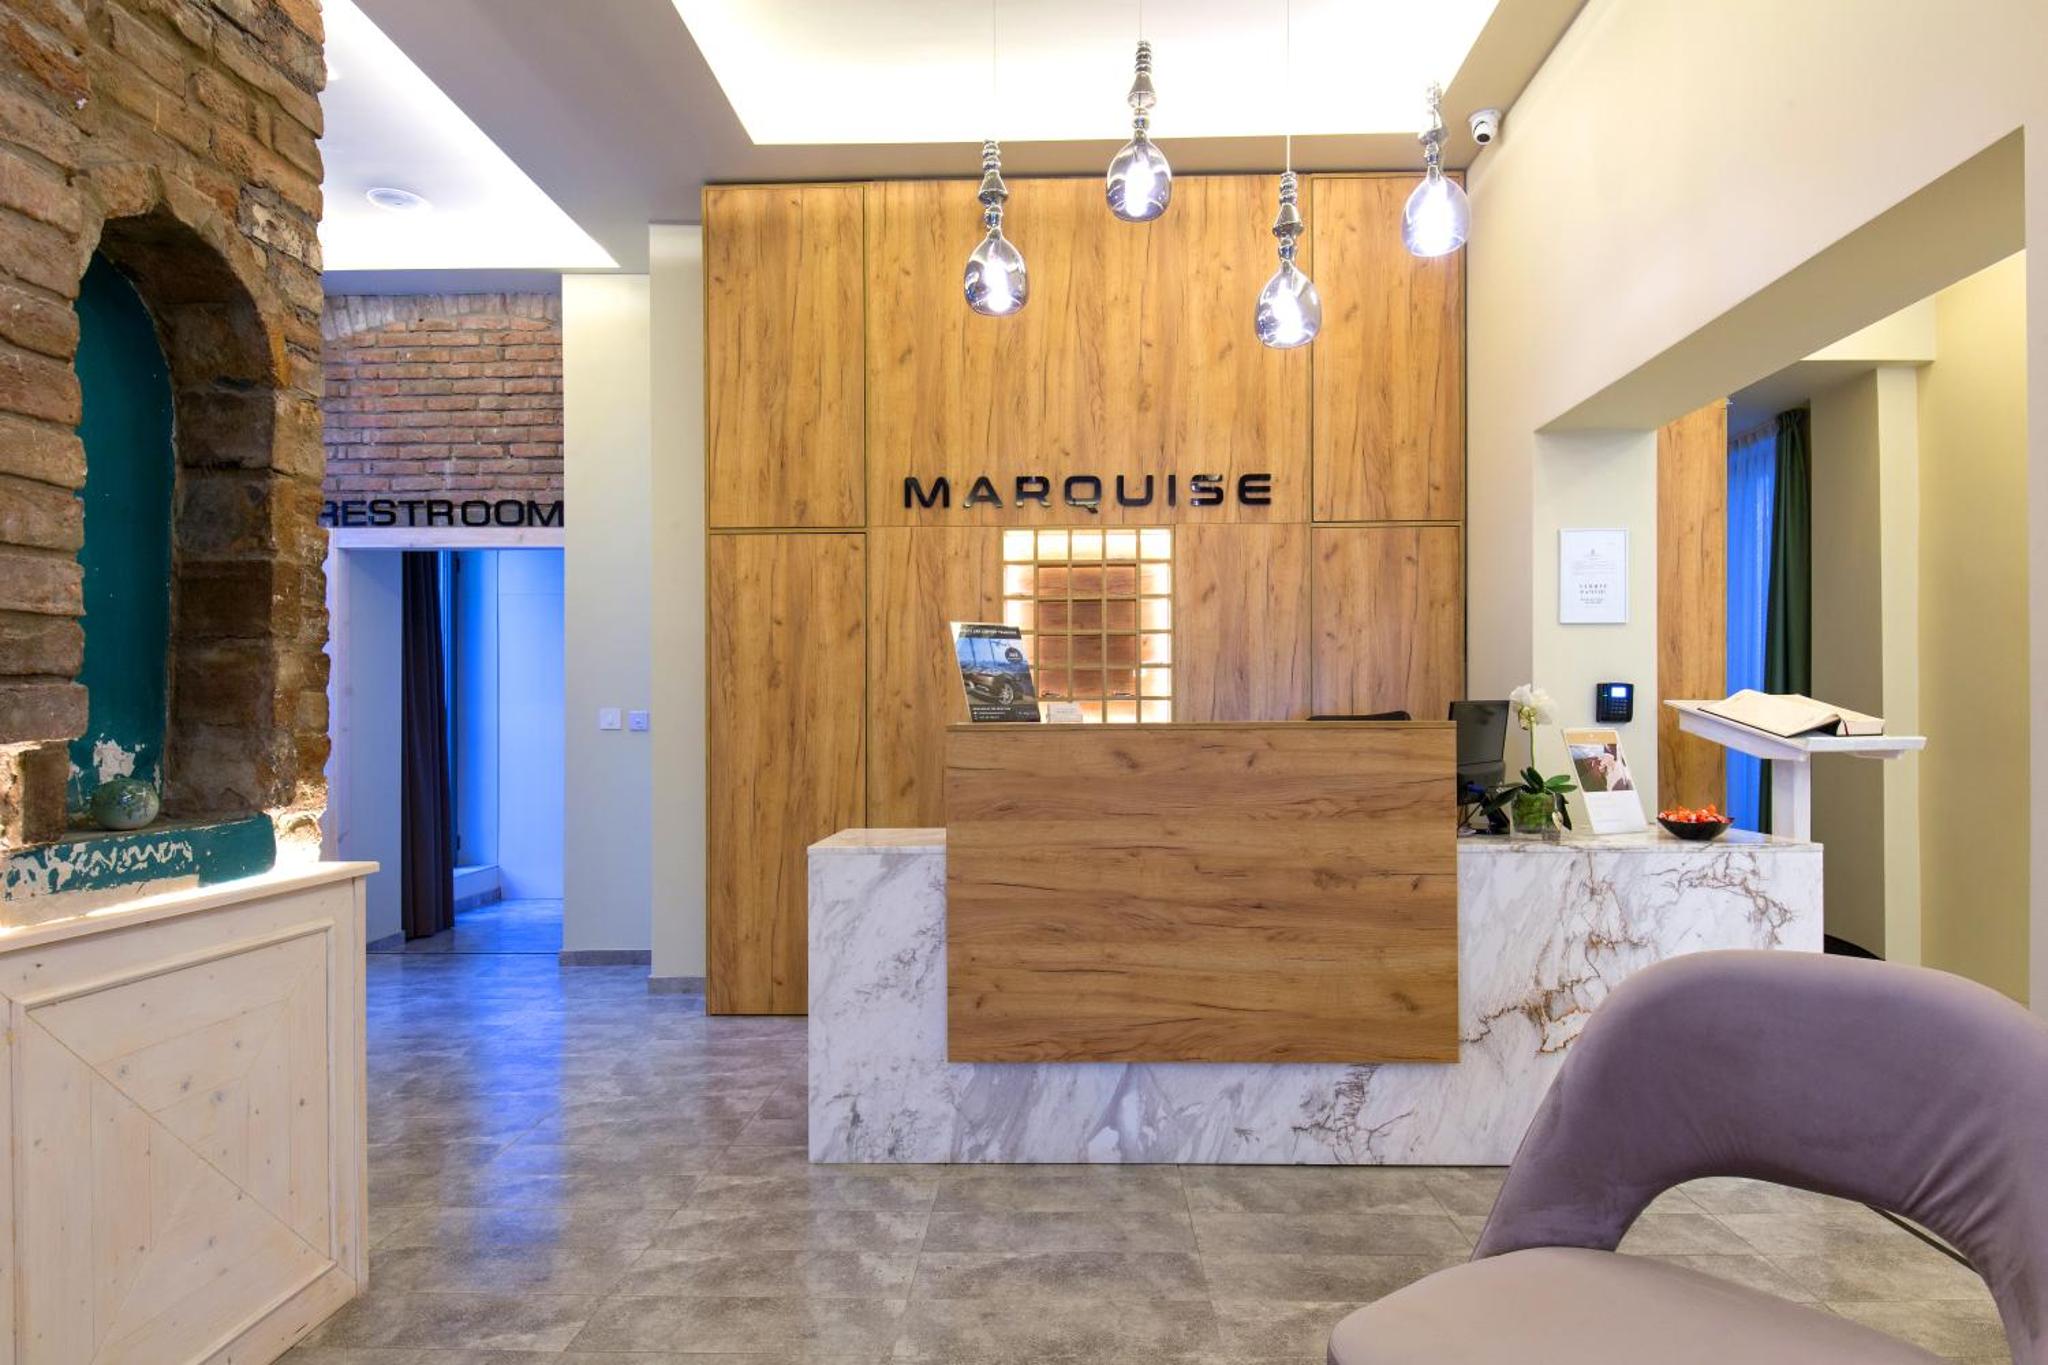 Marquise Hotel